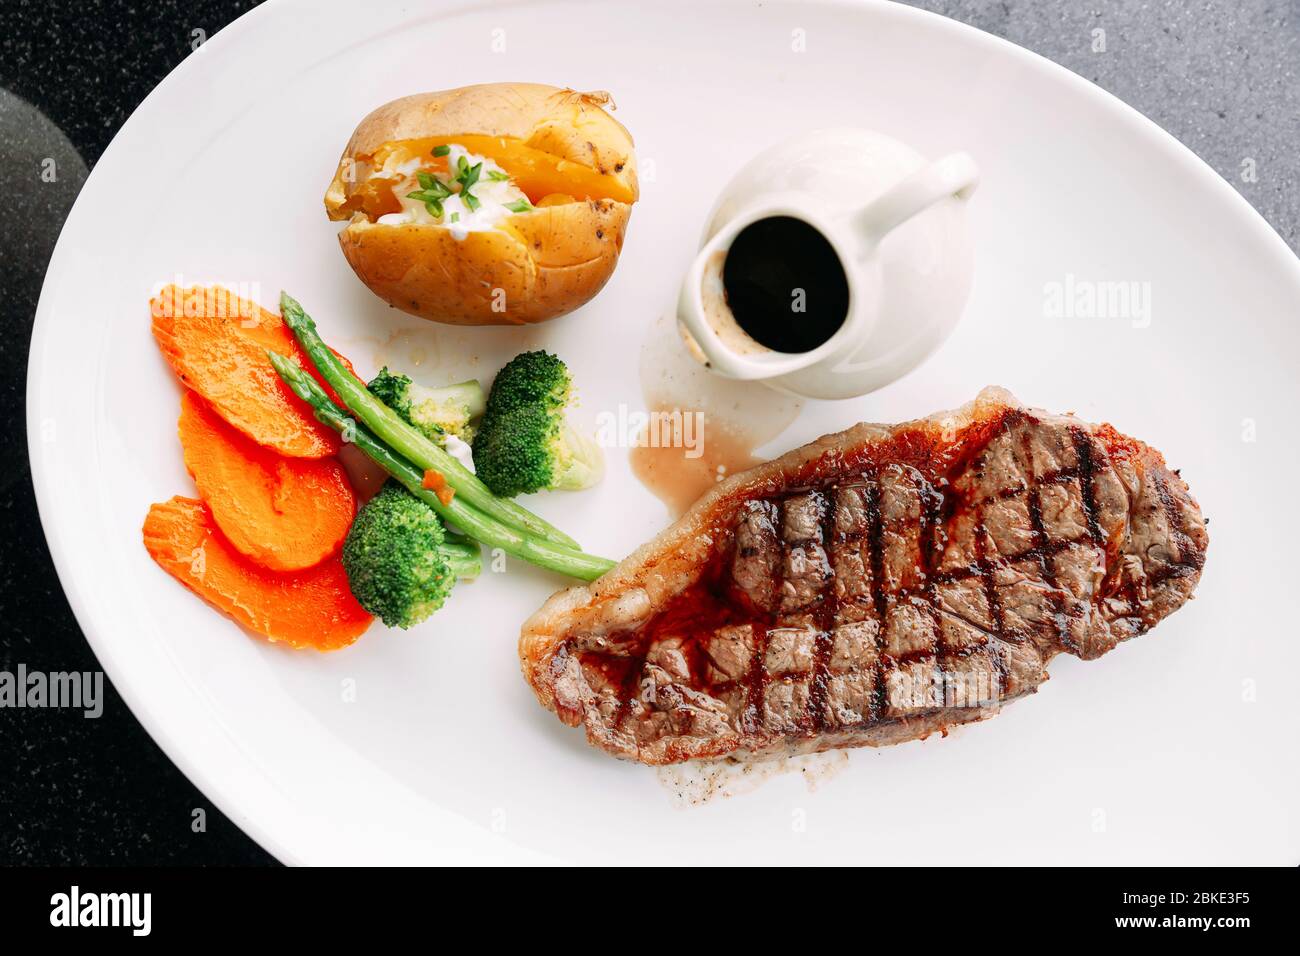 Top view of Charcoal grilled boneless dry-aged Top Loin steak served with BBQ sauce, stir-fried vegetables and baked potato in a white plate. Stock Photo